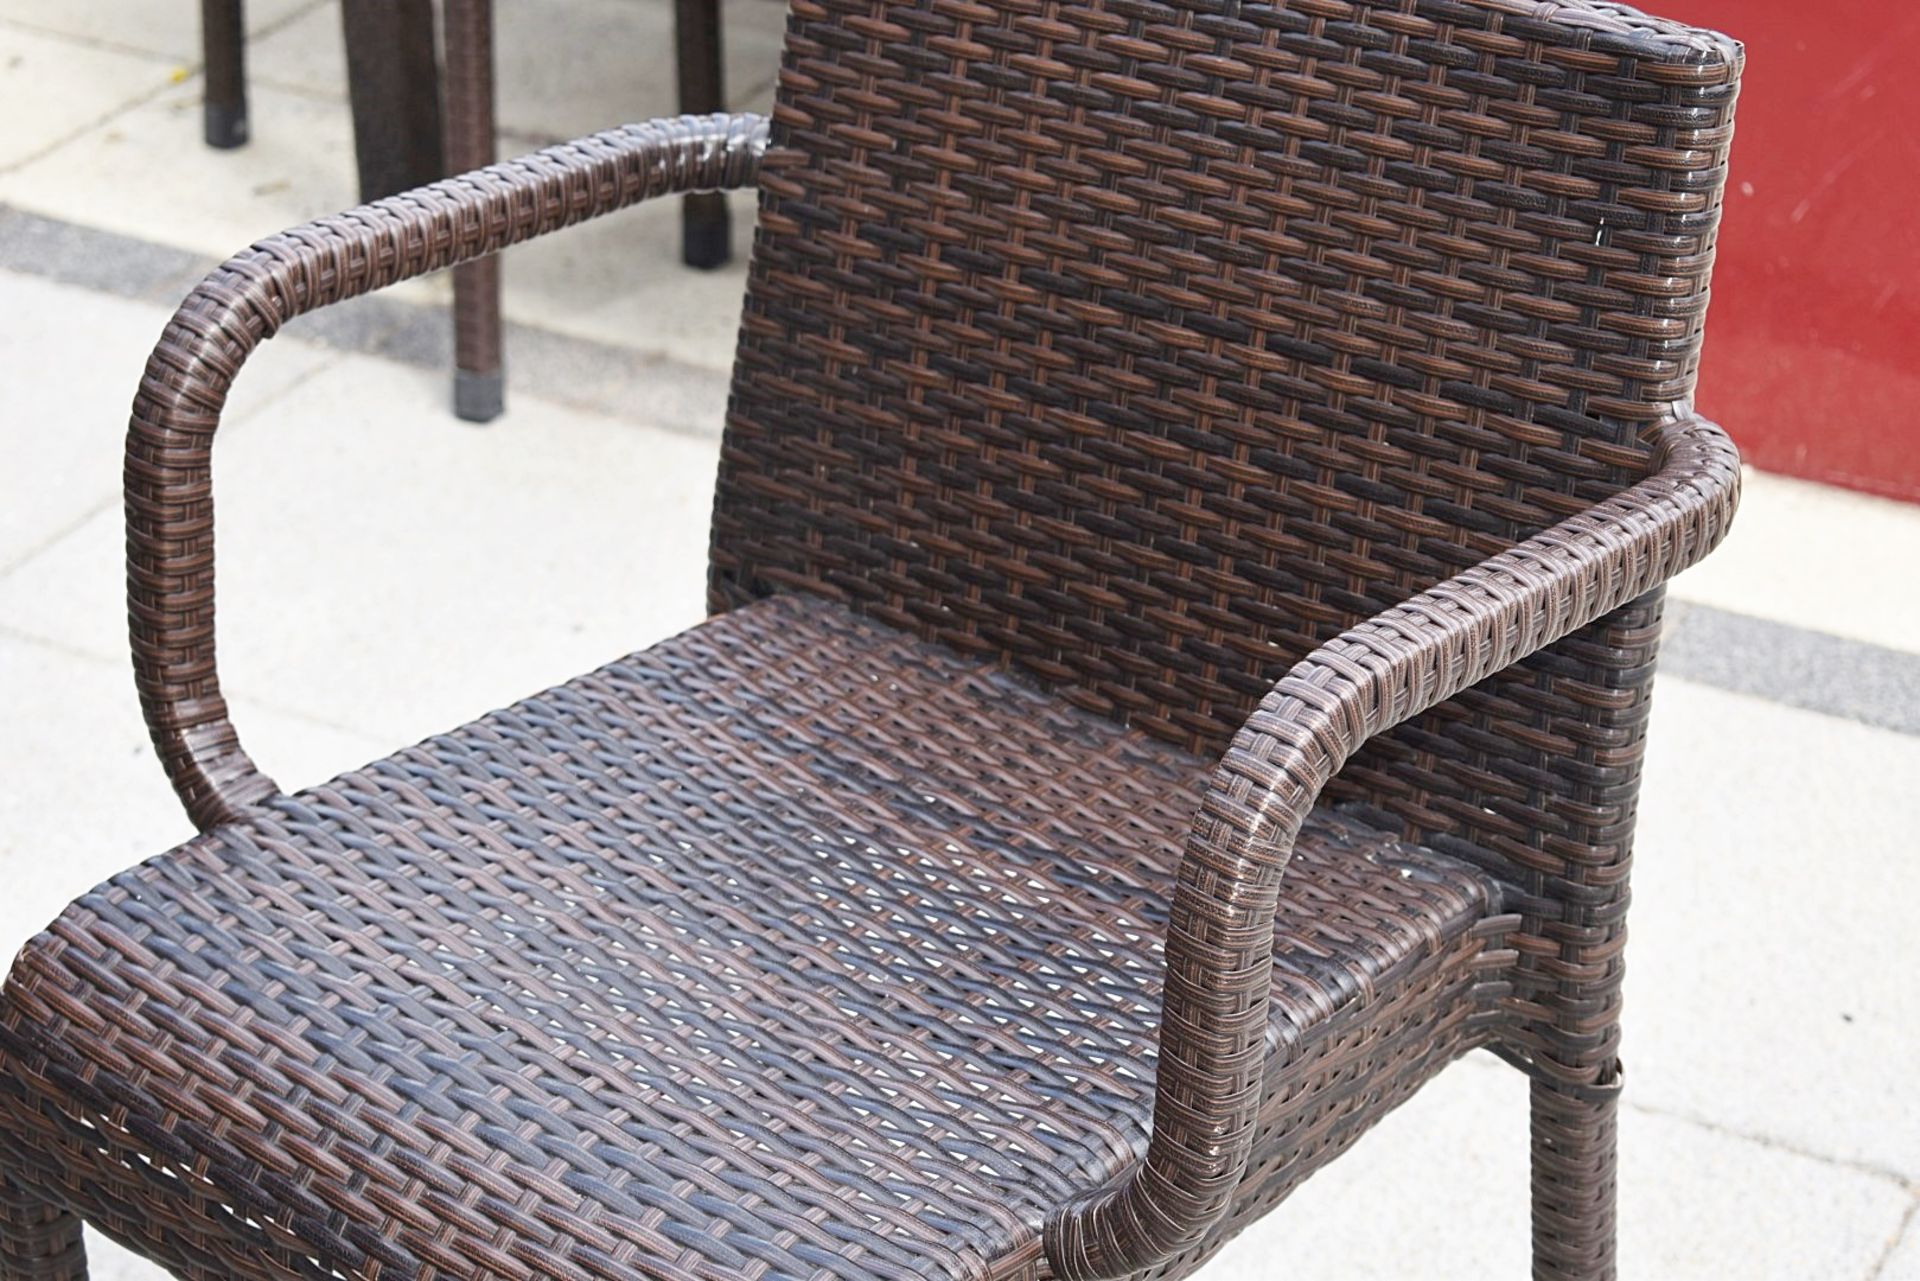 12 x Outdoor Rattan Garden Chairs With 4 Matching Square Tables - Ref: CB OS - CL420 - From a - Image 3 of 4